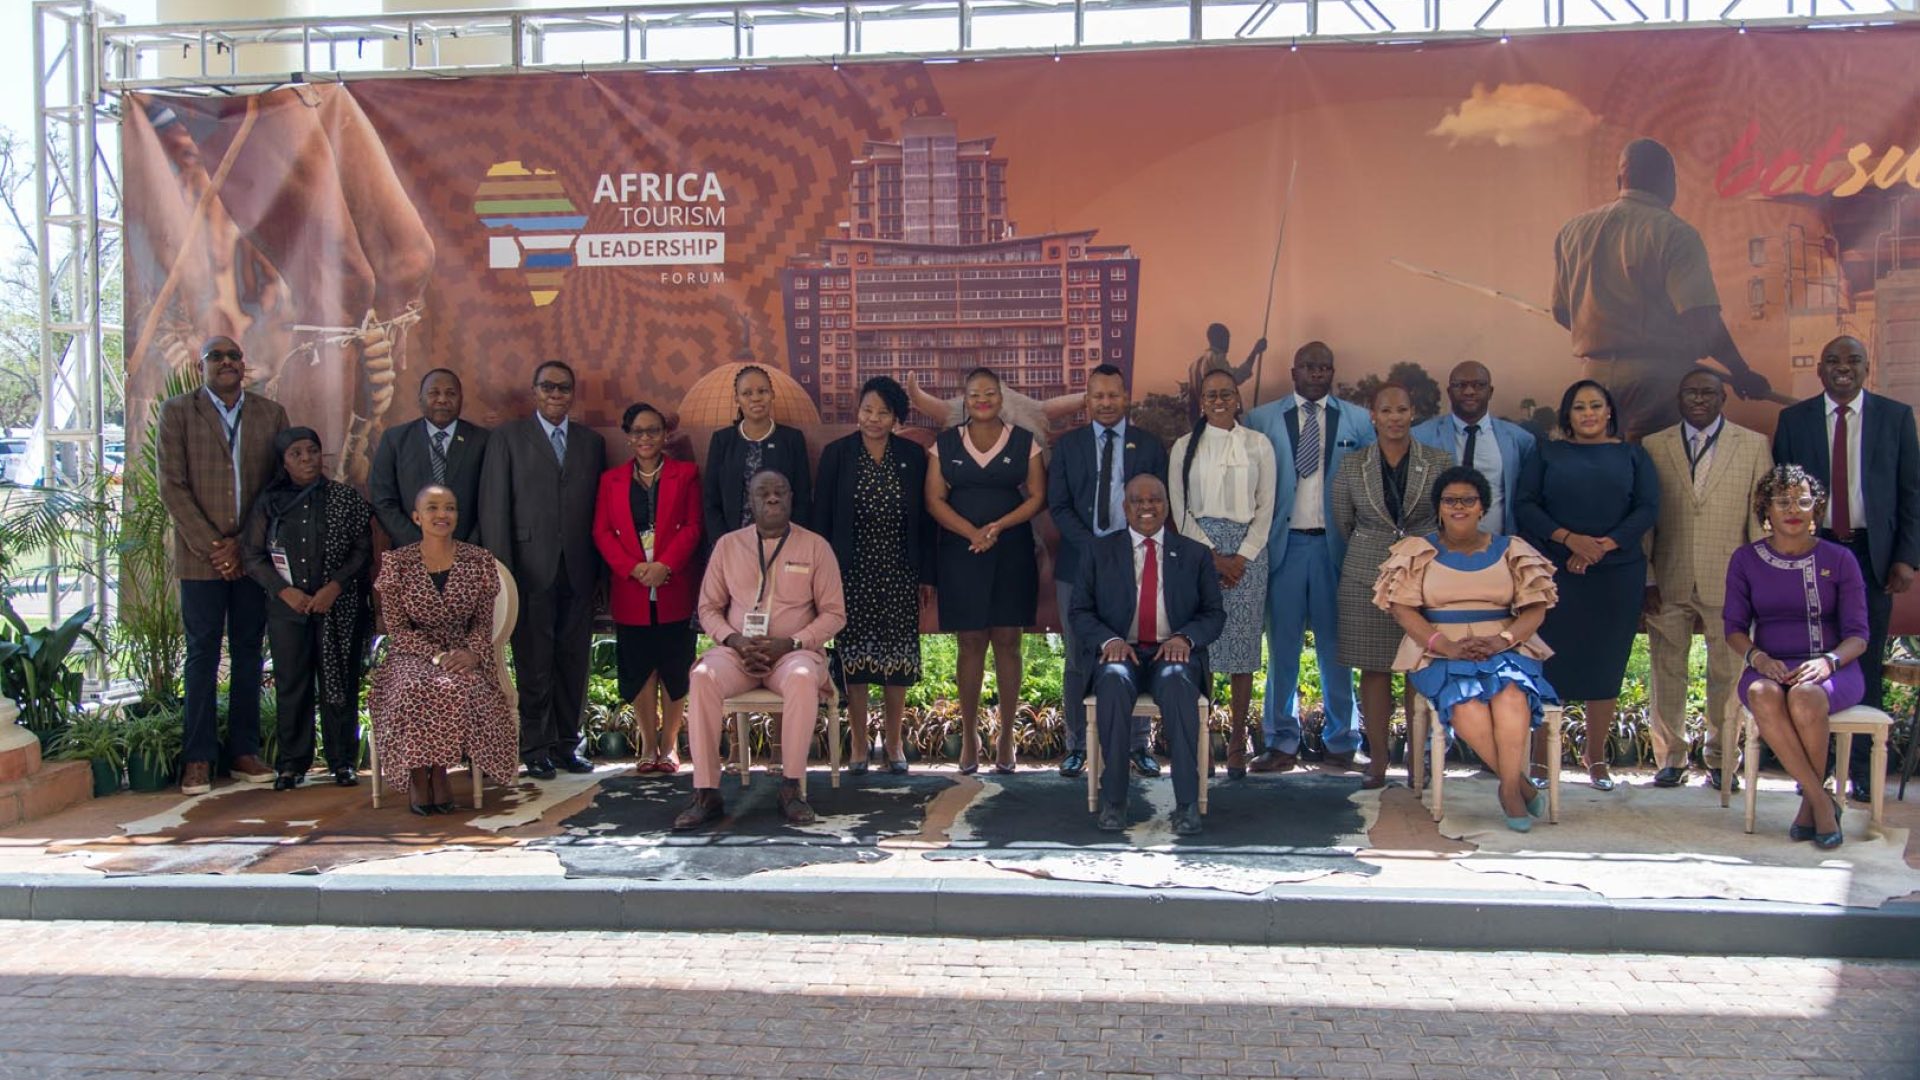 official-opening-of-5th-africa-tourism-leadership-forum-in-botswana_52452812861_o